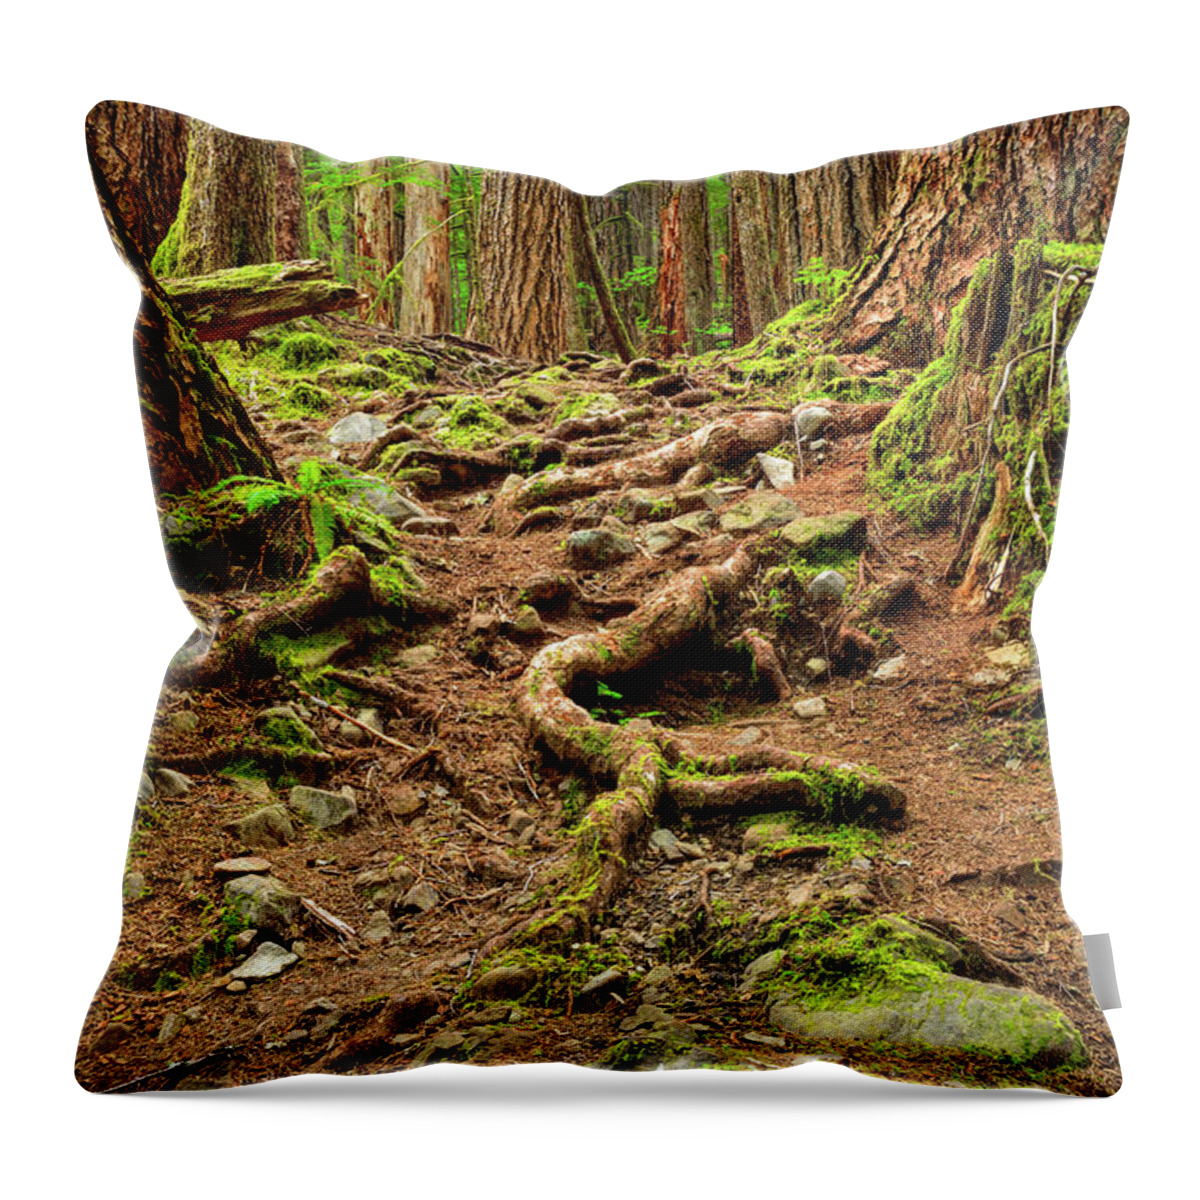 Olympic National Park Throw Pillow featuring the photograph Olympic Roots by Spencer McDonald